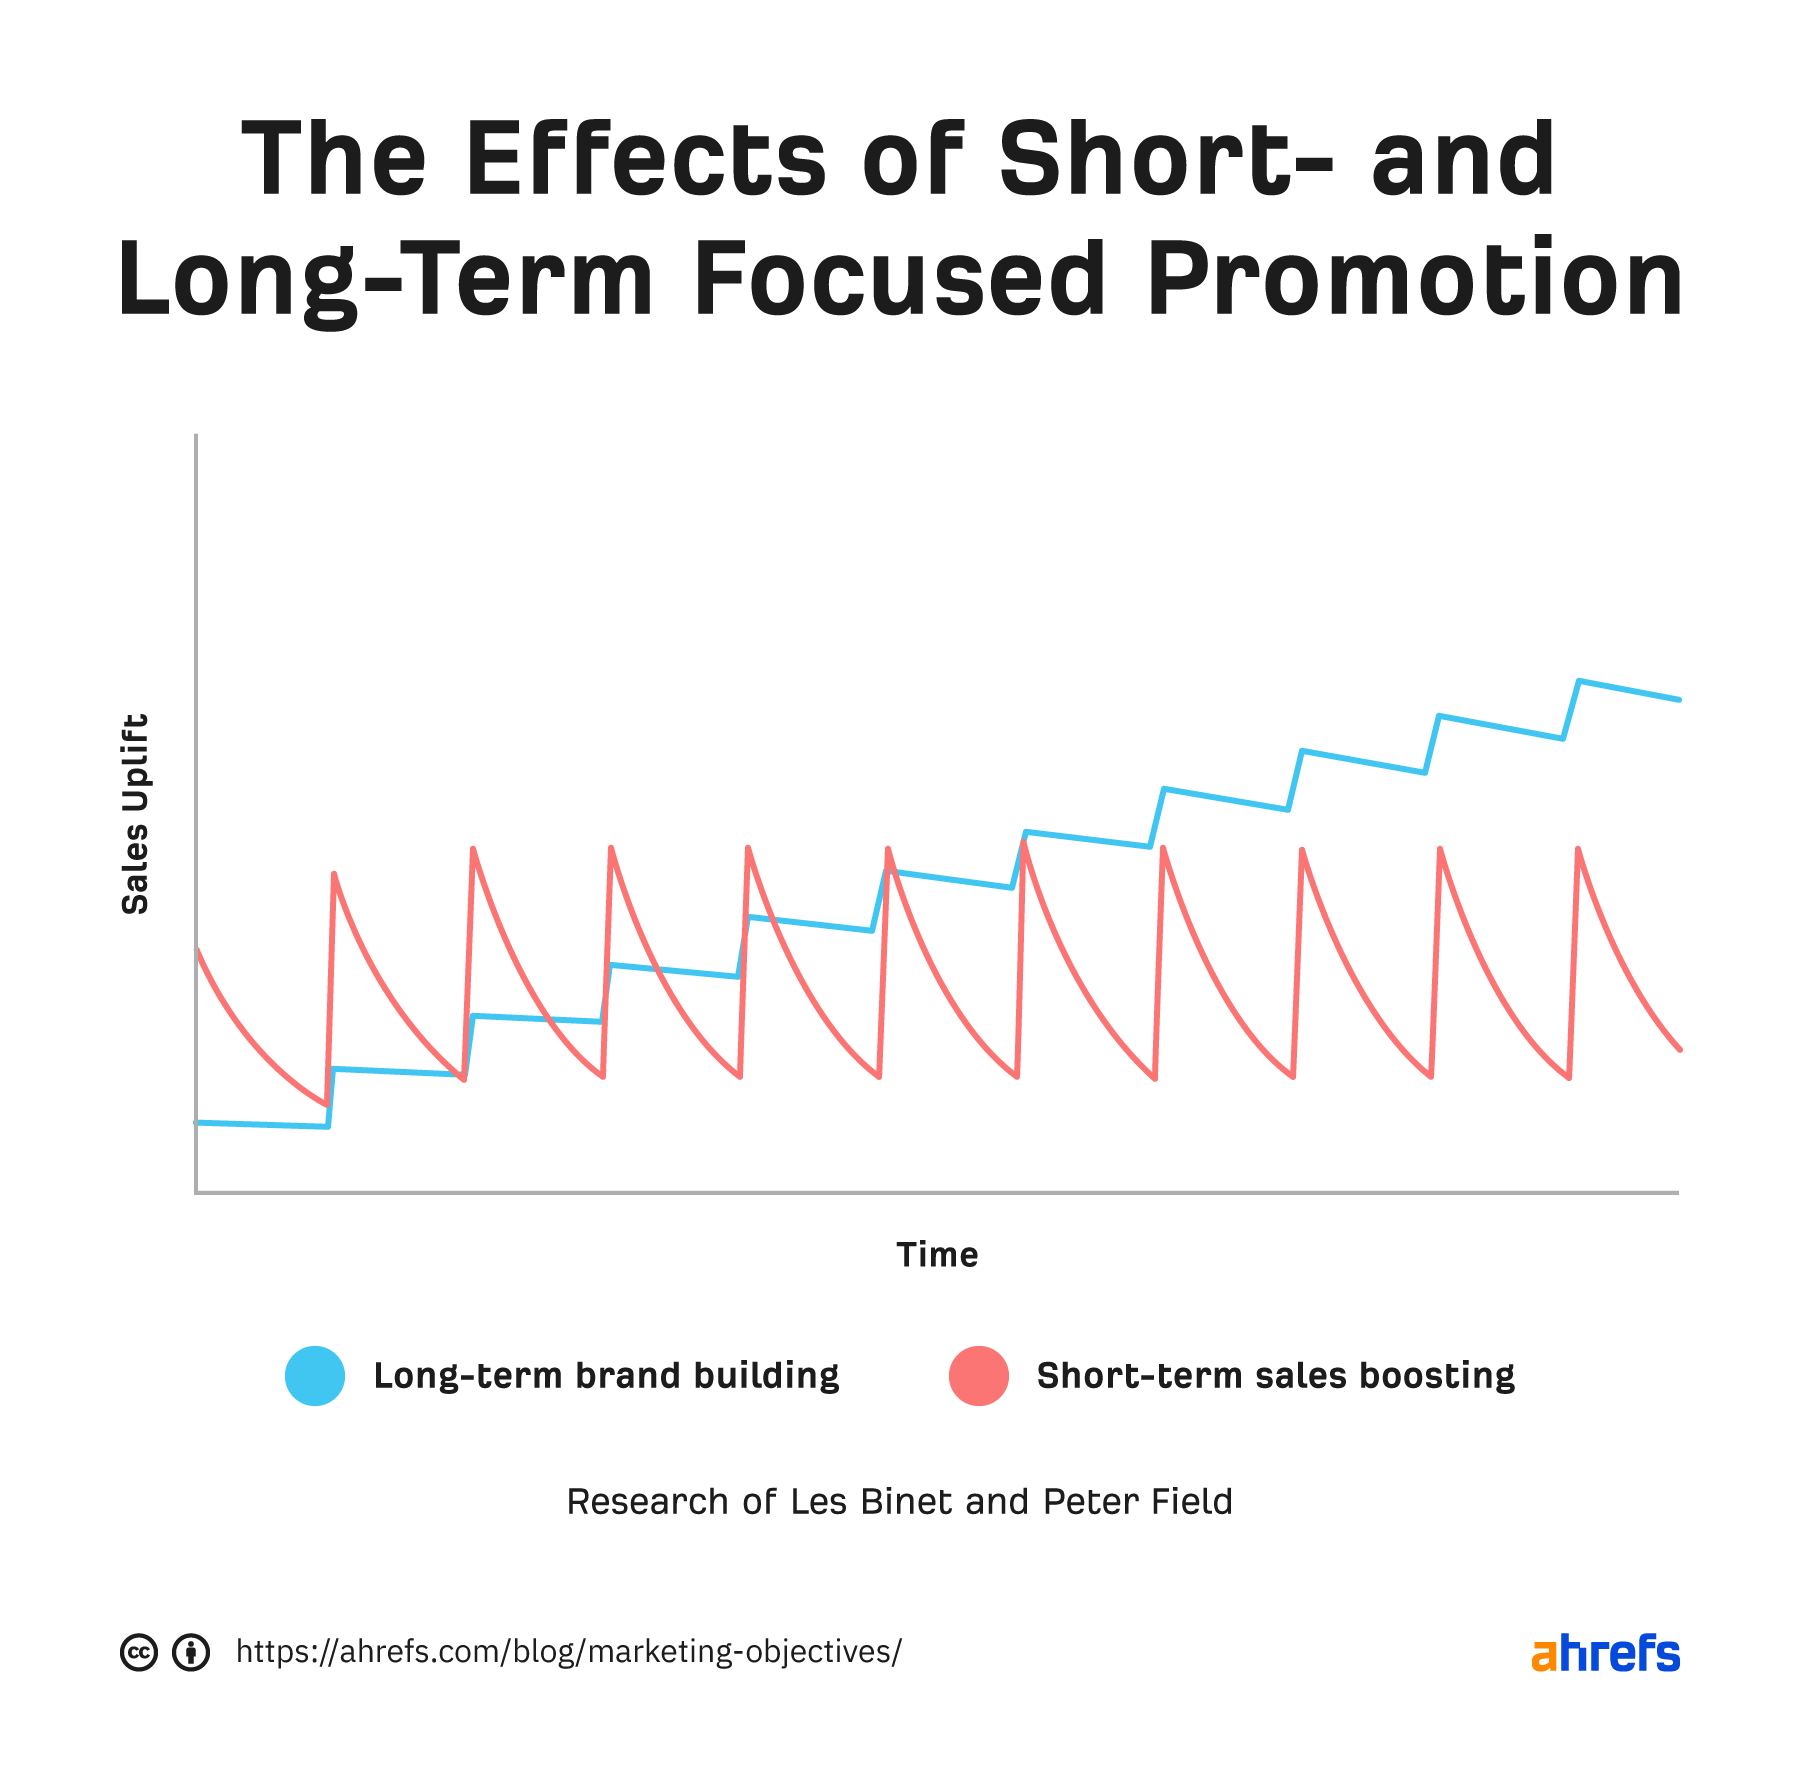 The effects of short- and long-term focused promotion